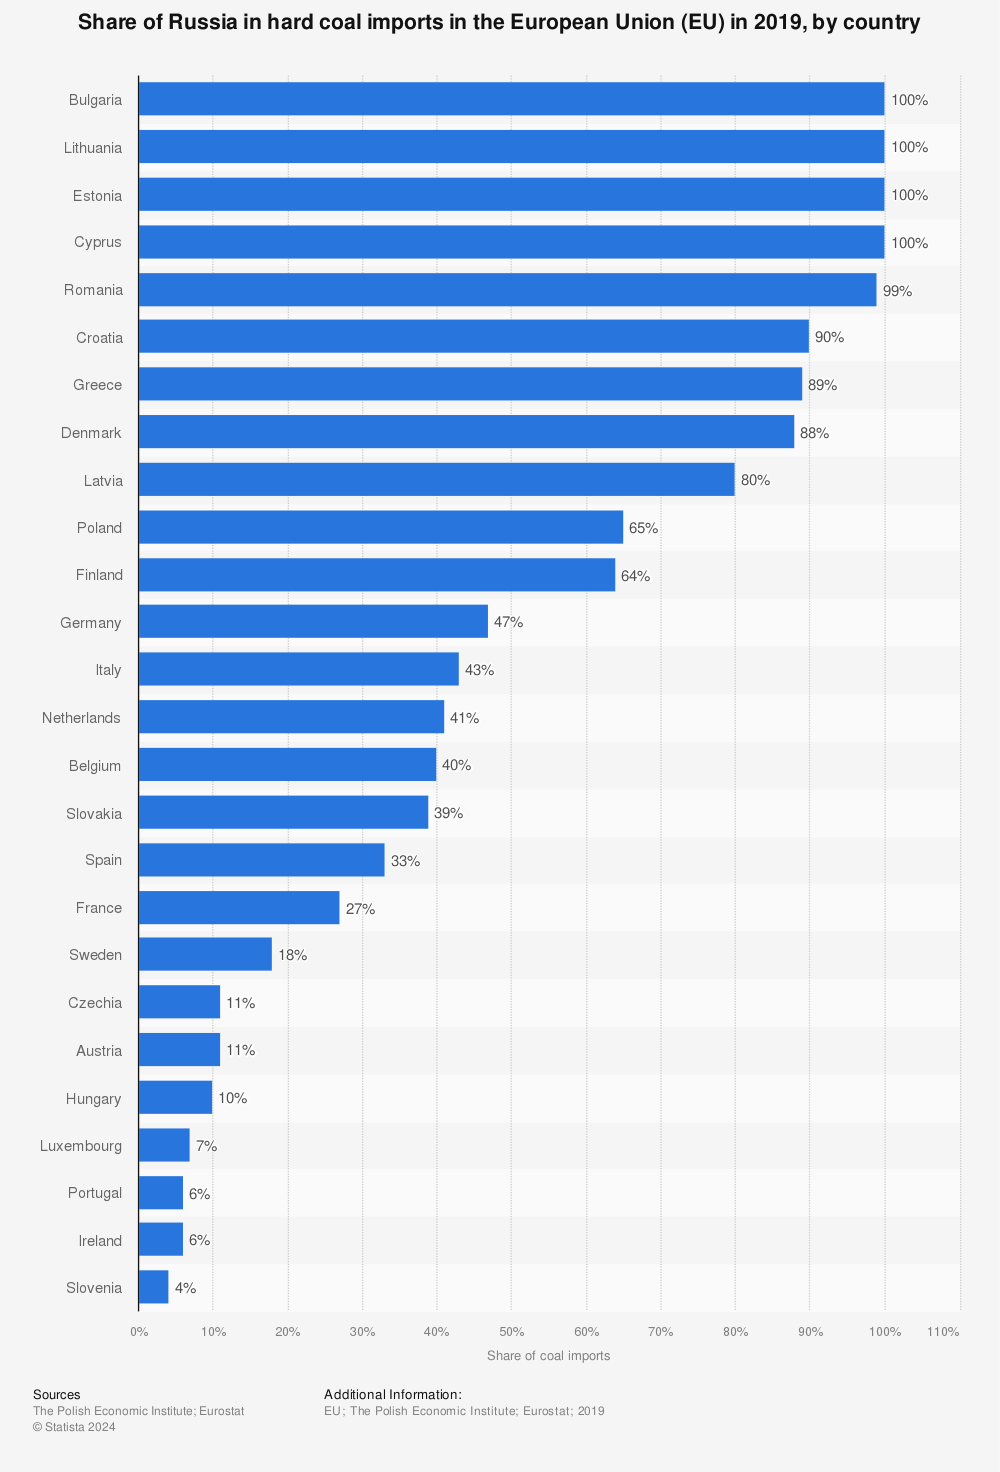 Statistic: Share of Russia in hard coal imports in the European Union (EU) in 2019, by country | Statista